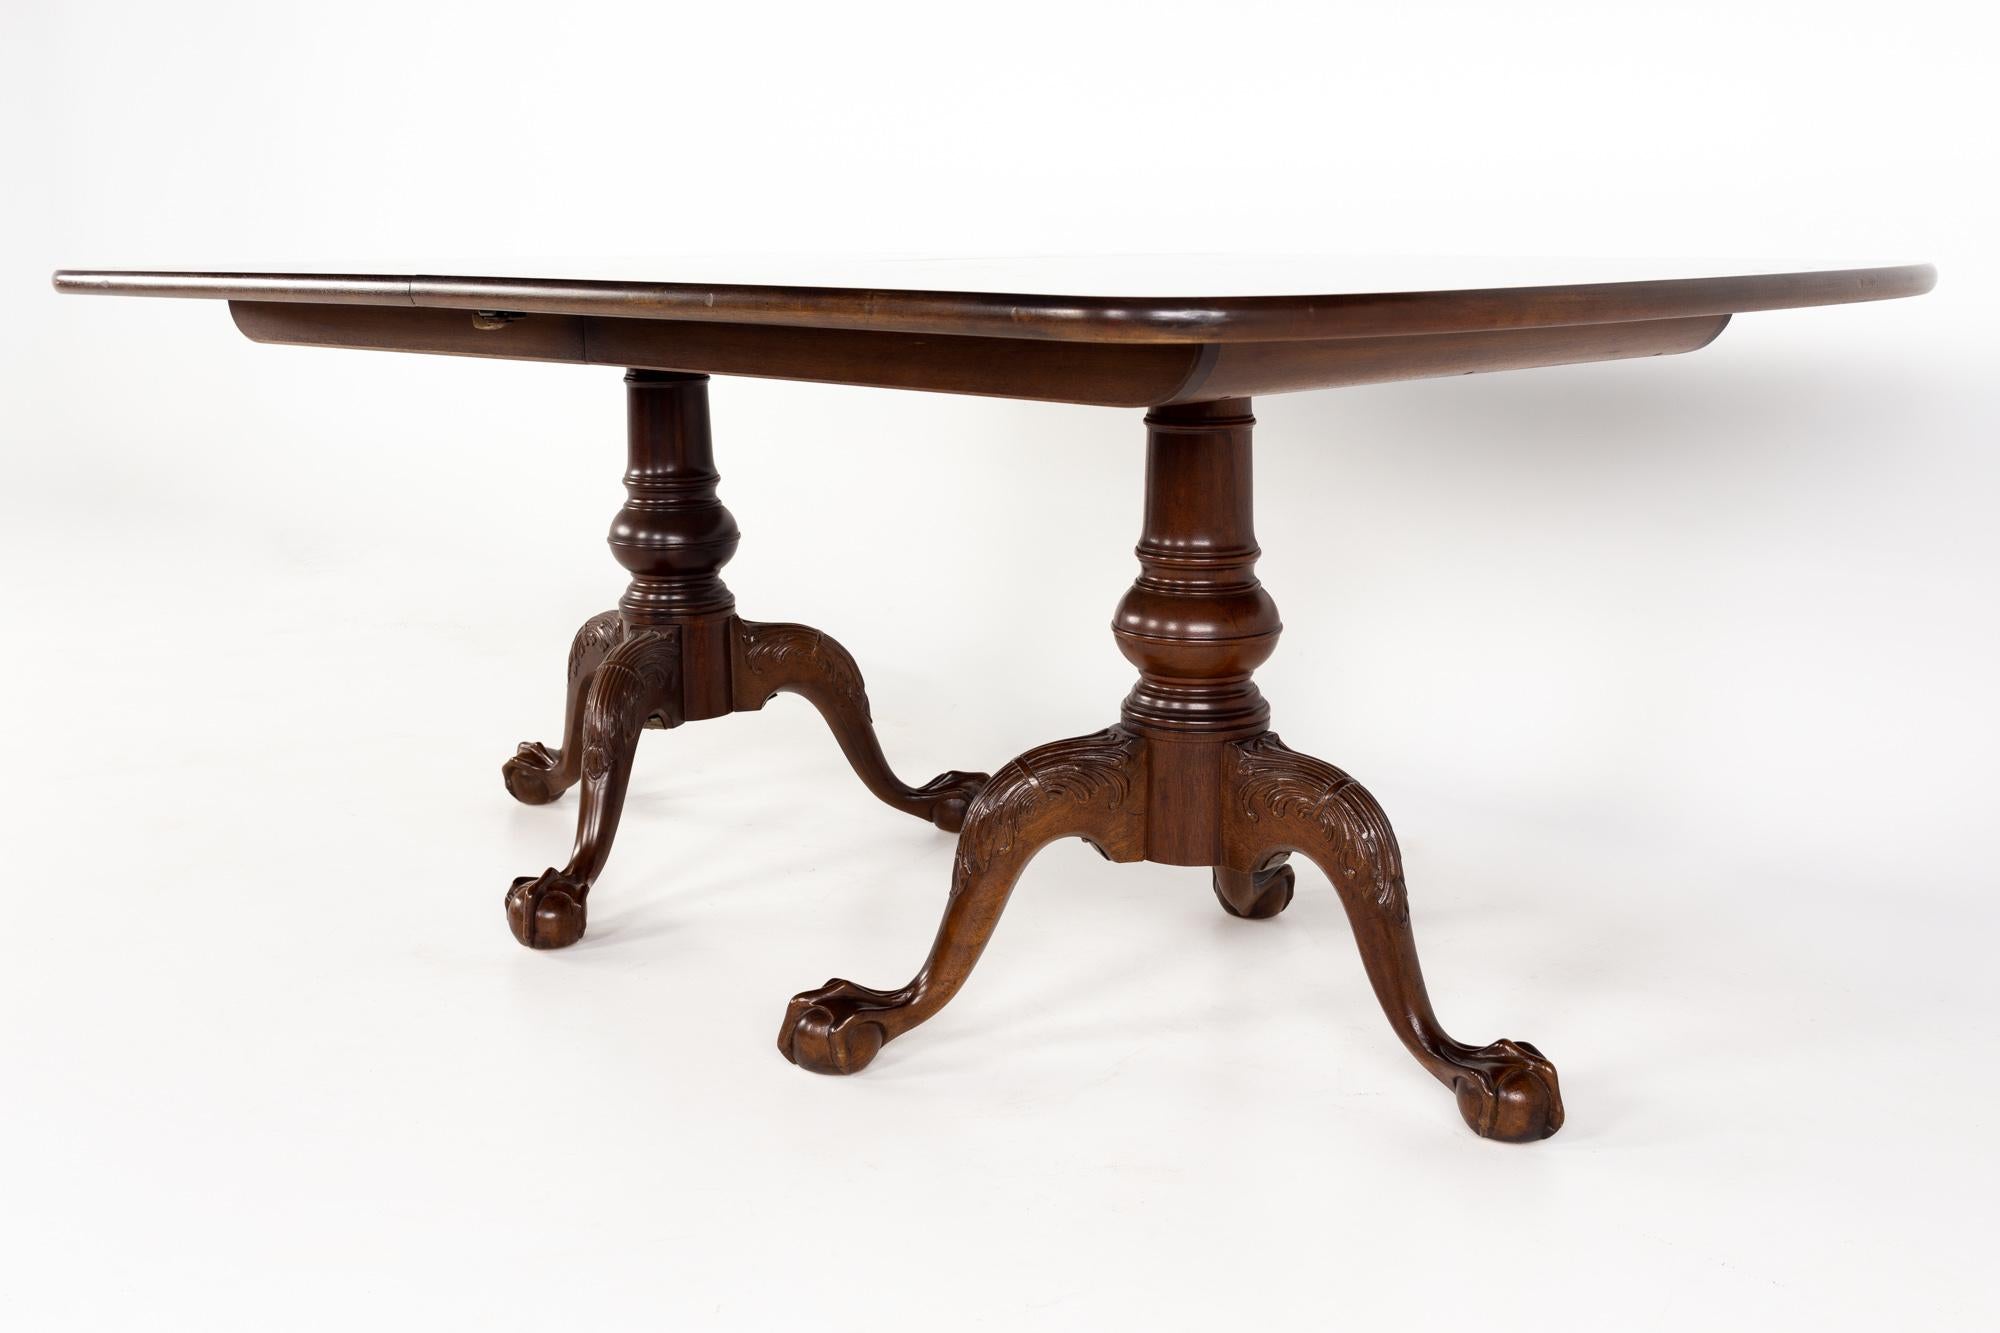 Modern Henredon Aston Court Mahogany Dining Table with 2 Leaves